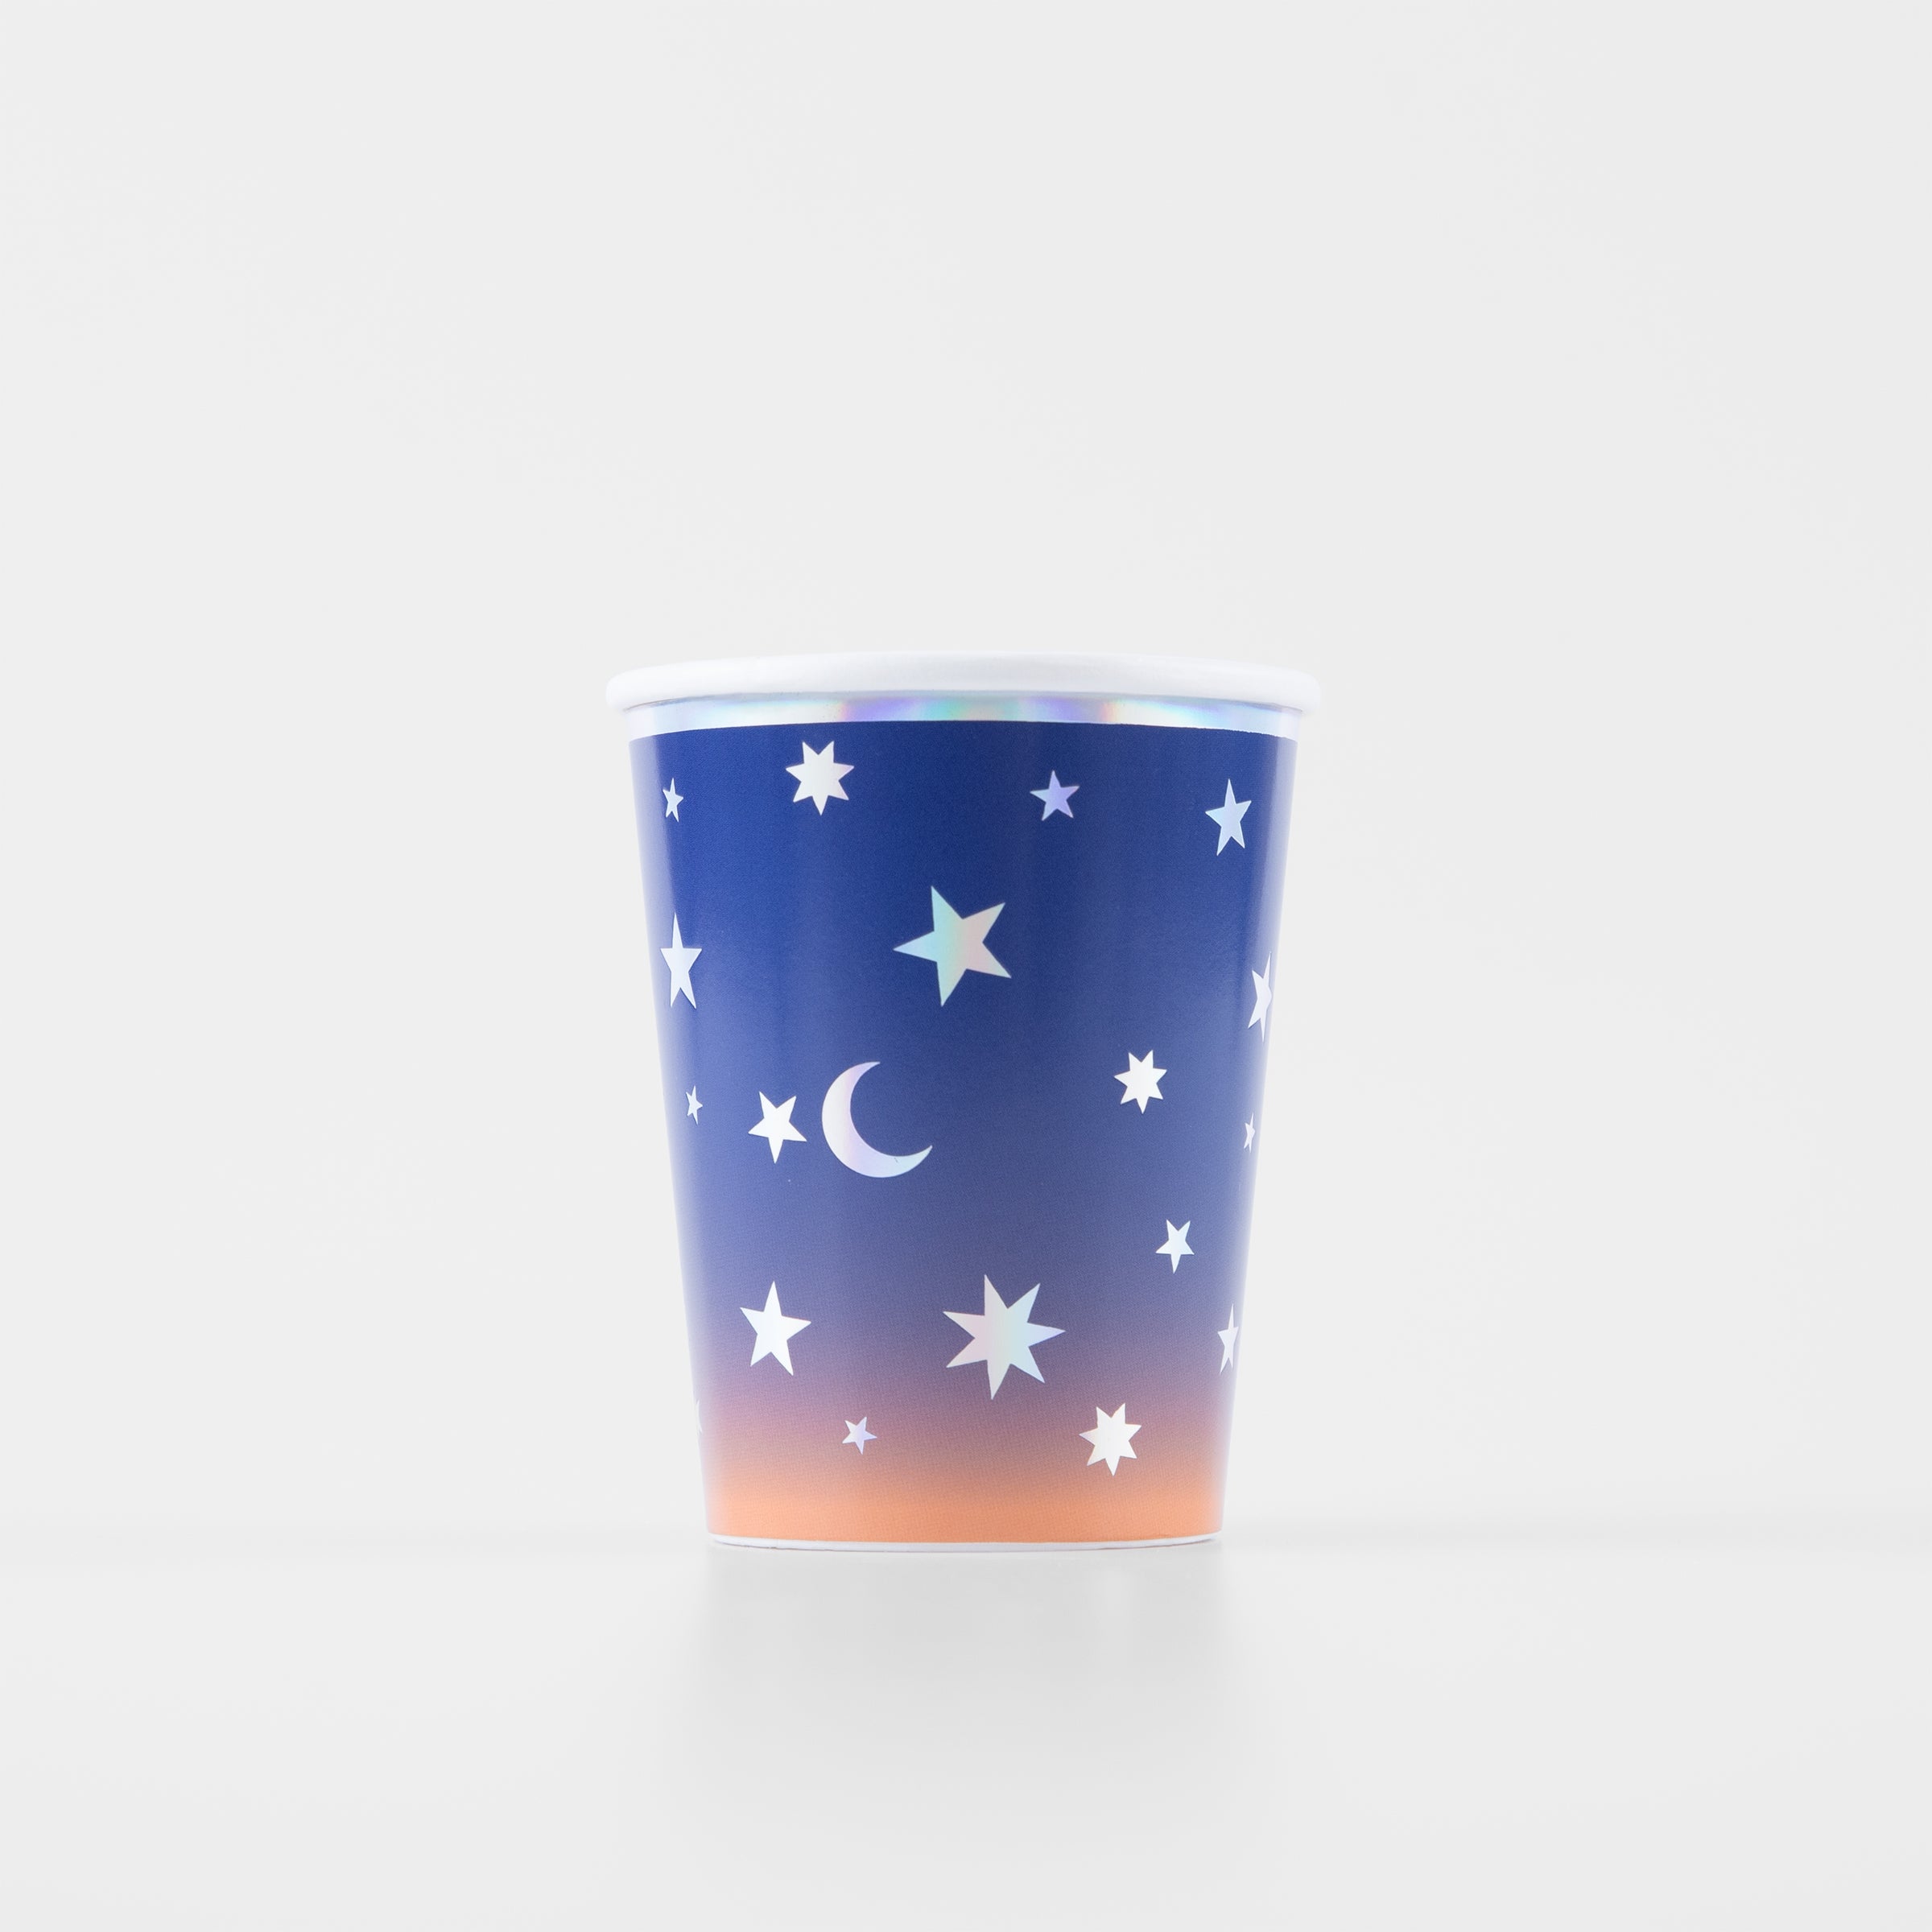 Our party cups, with moons and stars, are ideal for a wizard party, witch party or if you need Halloween party ideas.